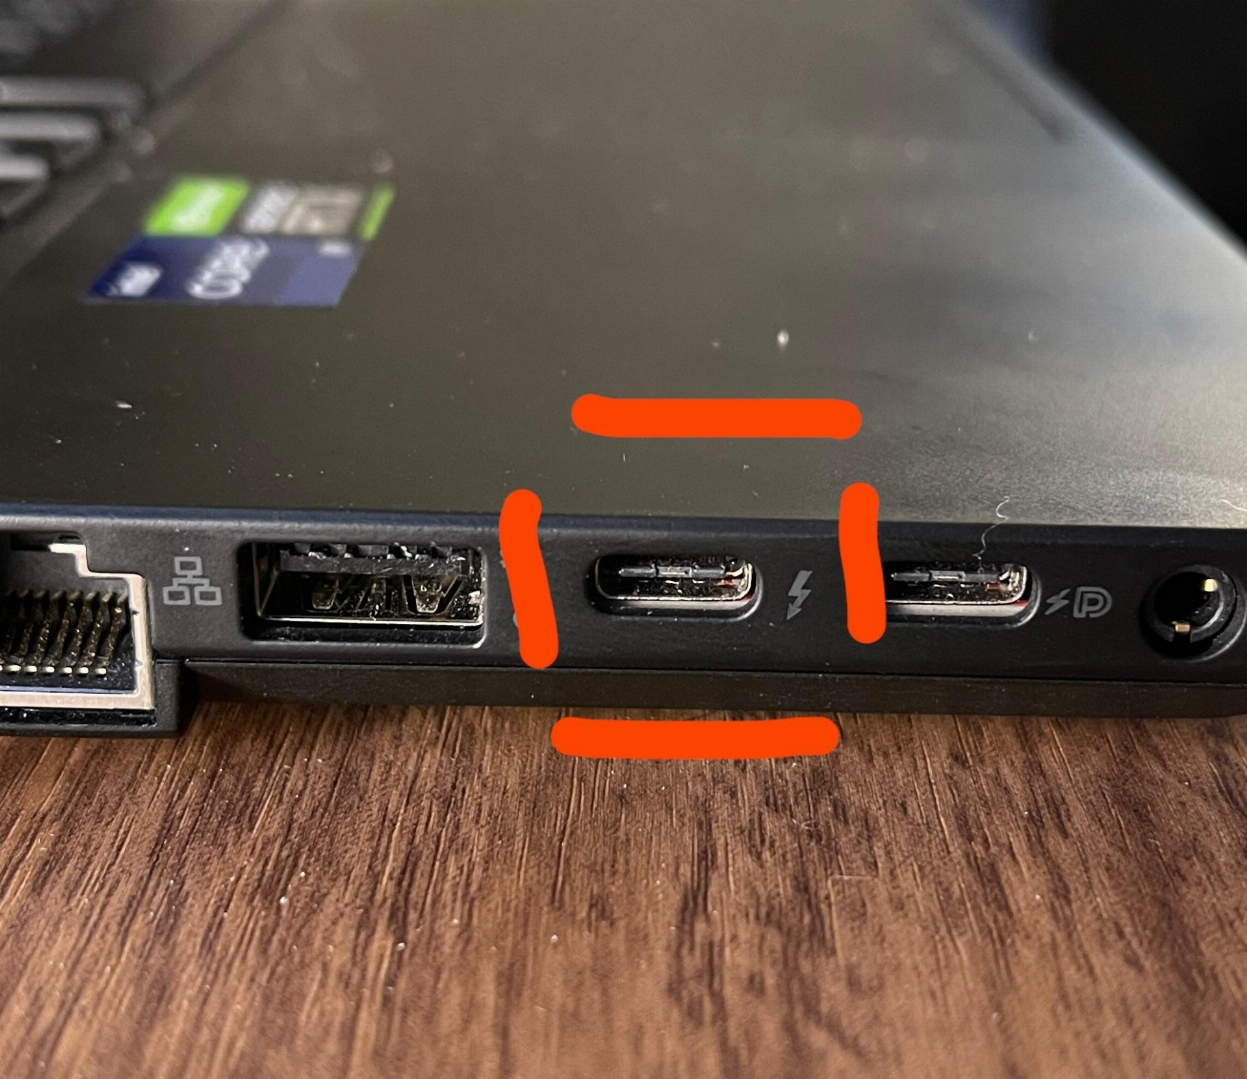 r/pcmasterrace - Thunderbolt port on windows laptop? What can I do with it? (Question in comments)